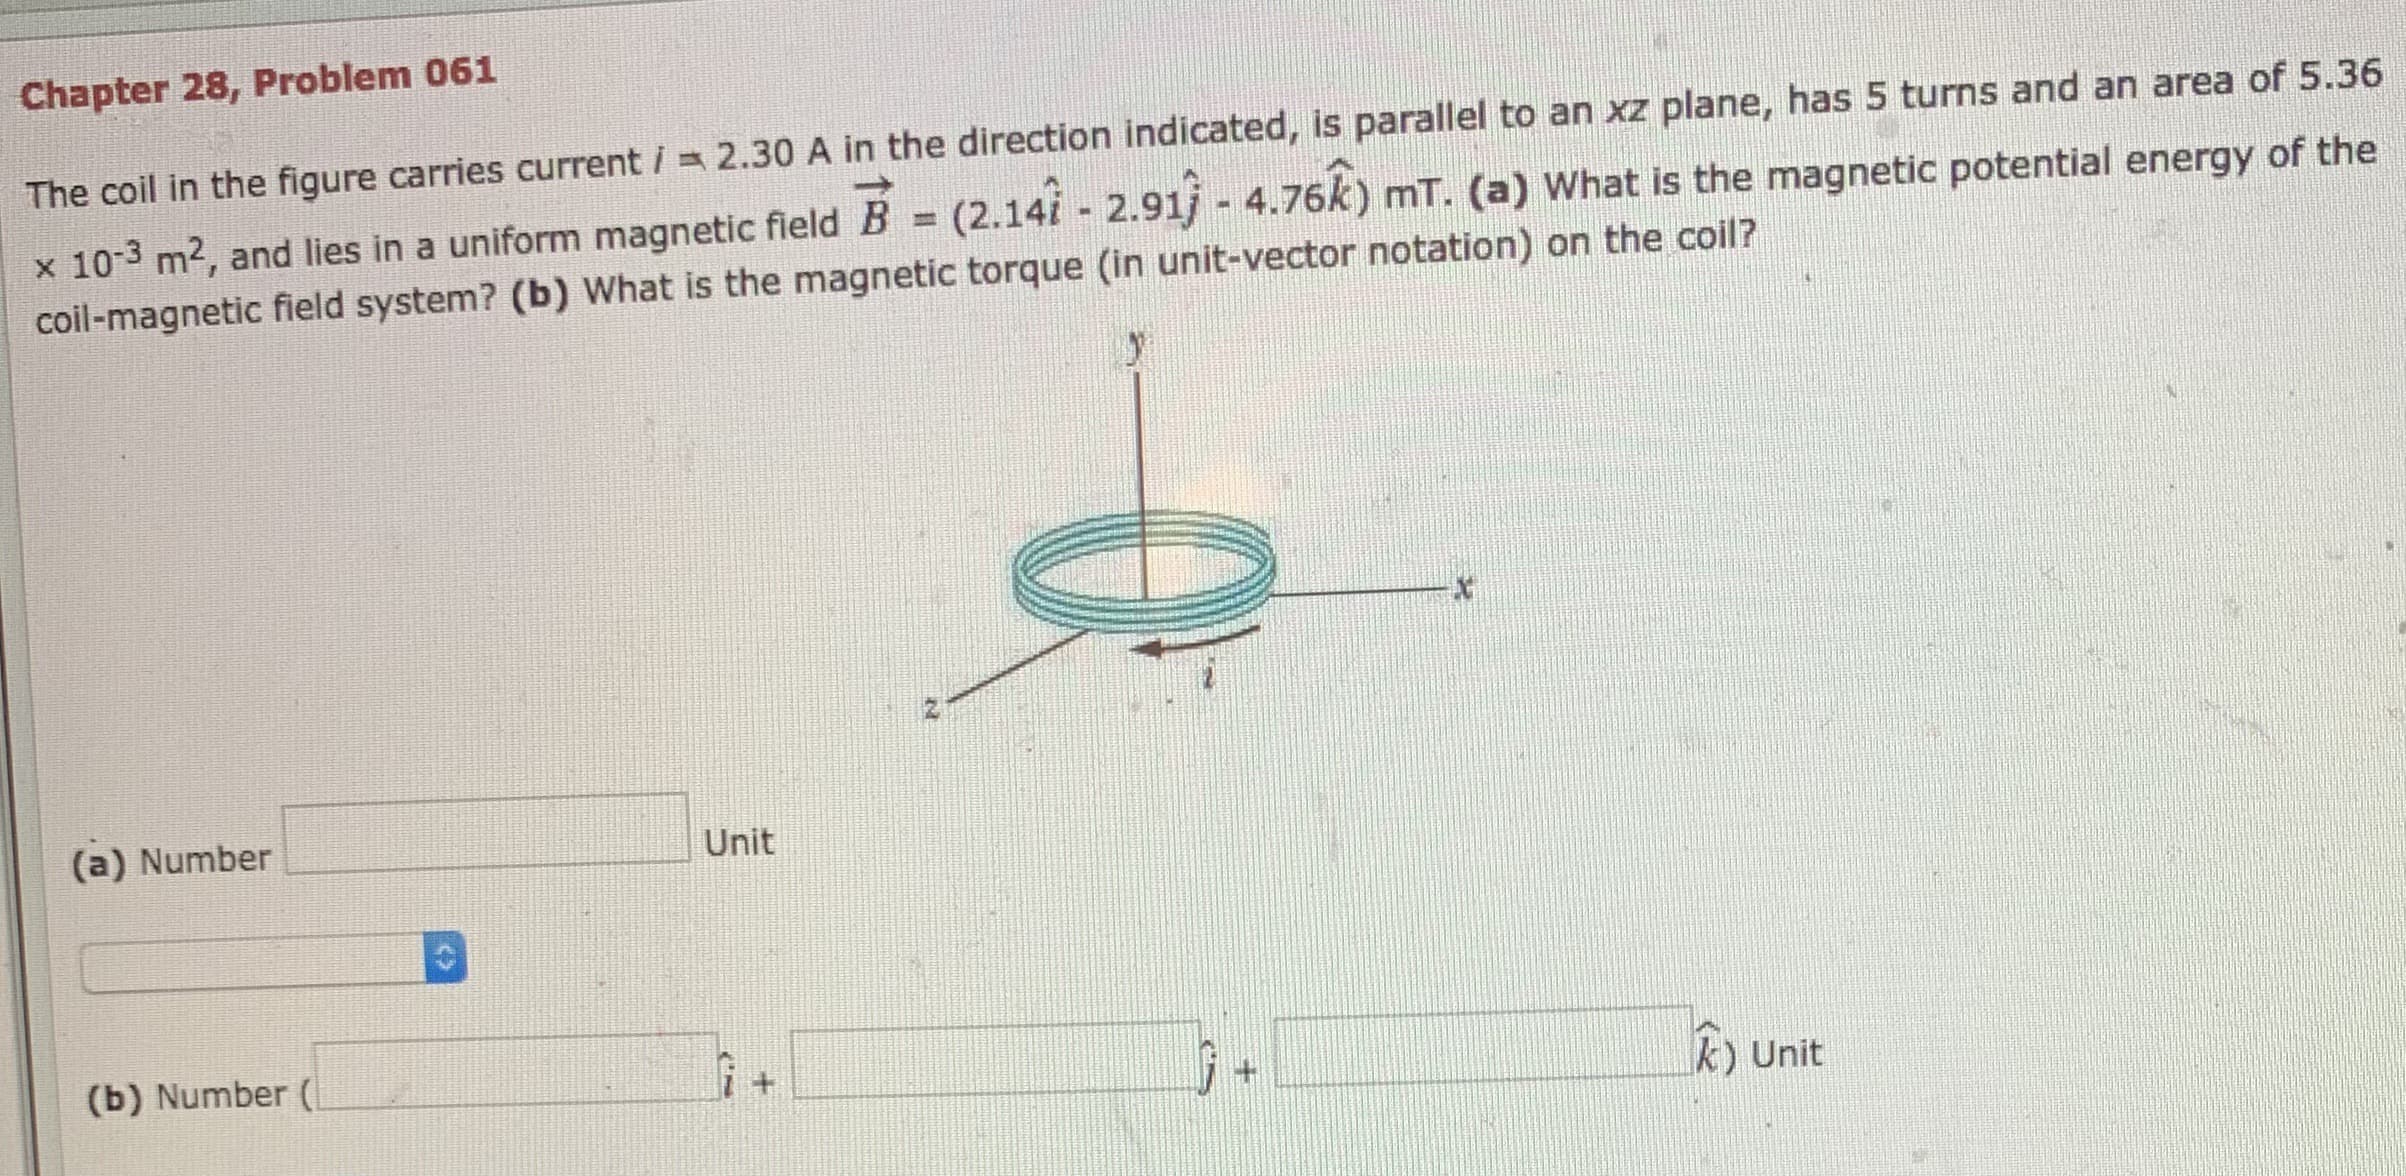 Chapter 28, Problem 061
The coil in the figure carries current i 2.30 A in the direction indicated, is parallel to an xz plane, has 5 turns and an area of 5.36
x 103 m2, and lies in a uniform magnetic field B = (2.14i 2.91j - 4.76k) mT. (a) What is the magnetic potential energy of the
coil-magnetic field system? (b) What is the magnetic torque (in unit-vector notation) on the coil?
(a) Number
Unit
(b) Number (
k) Unit
